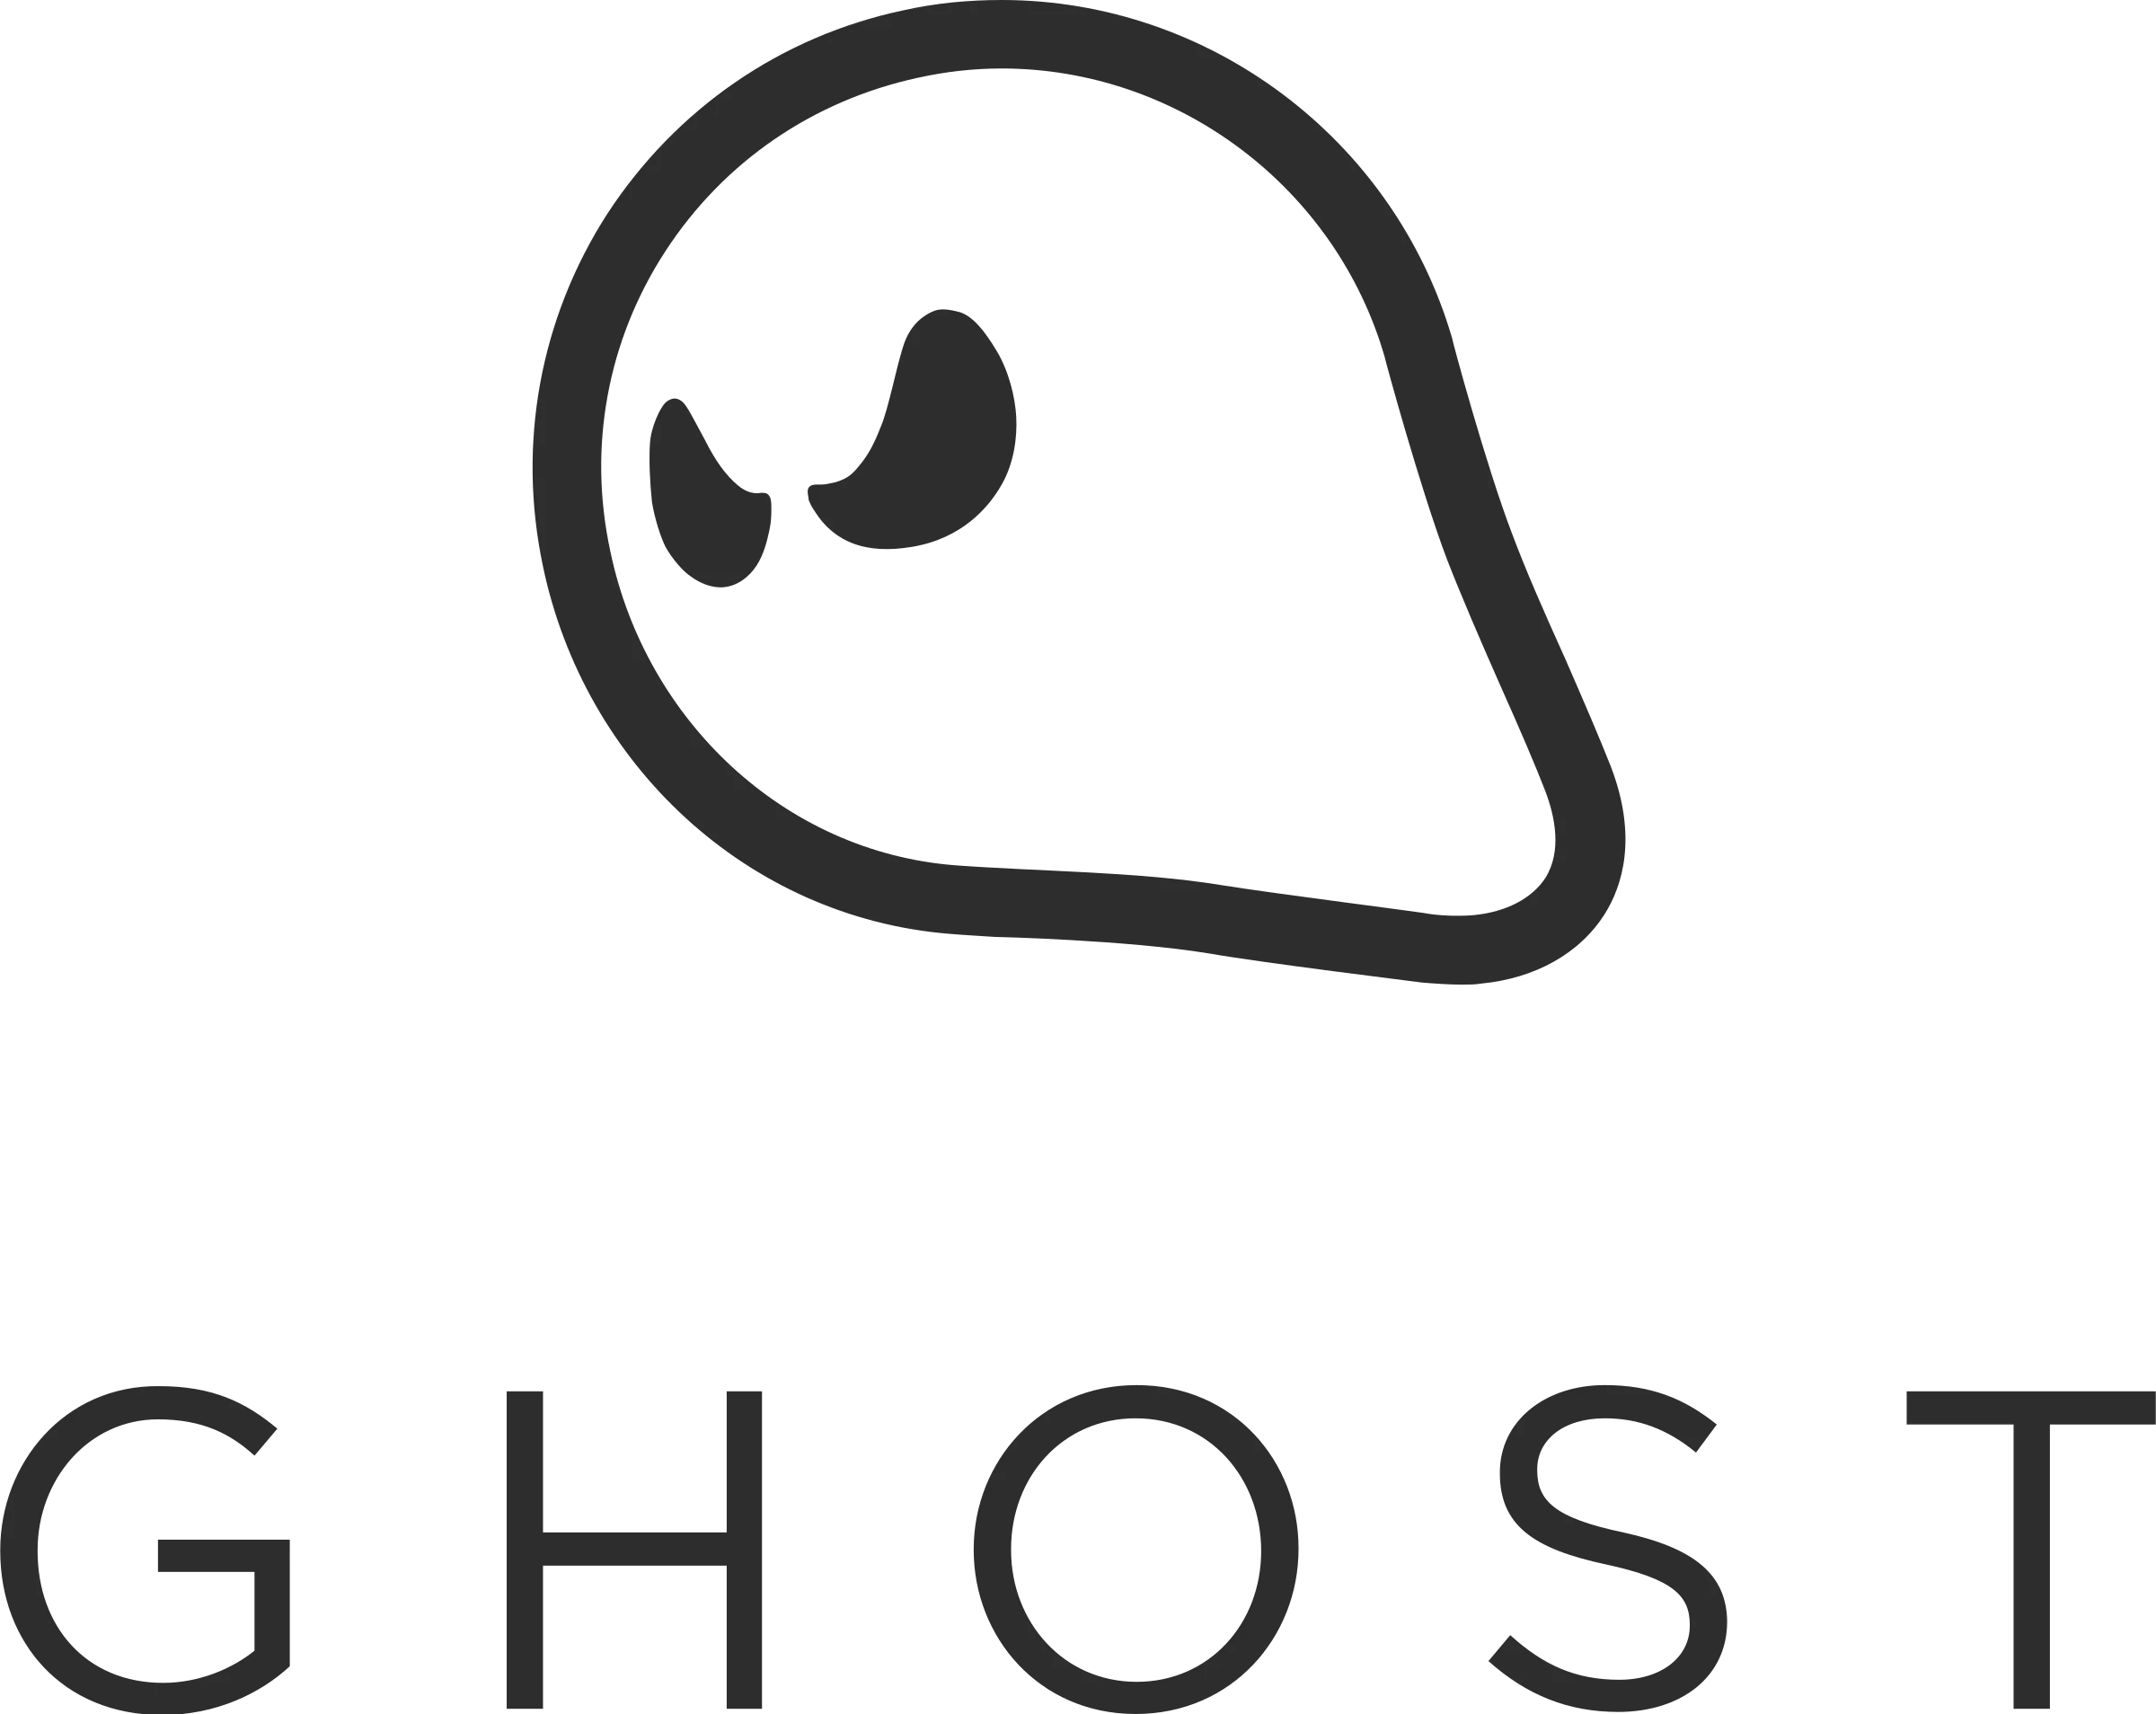 Ghost Games